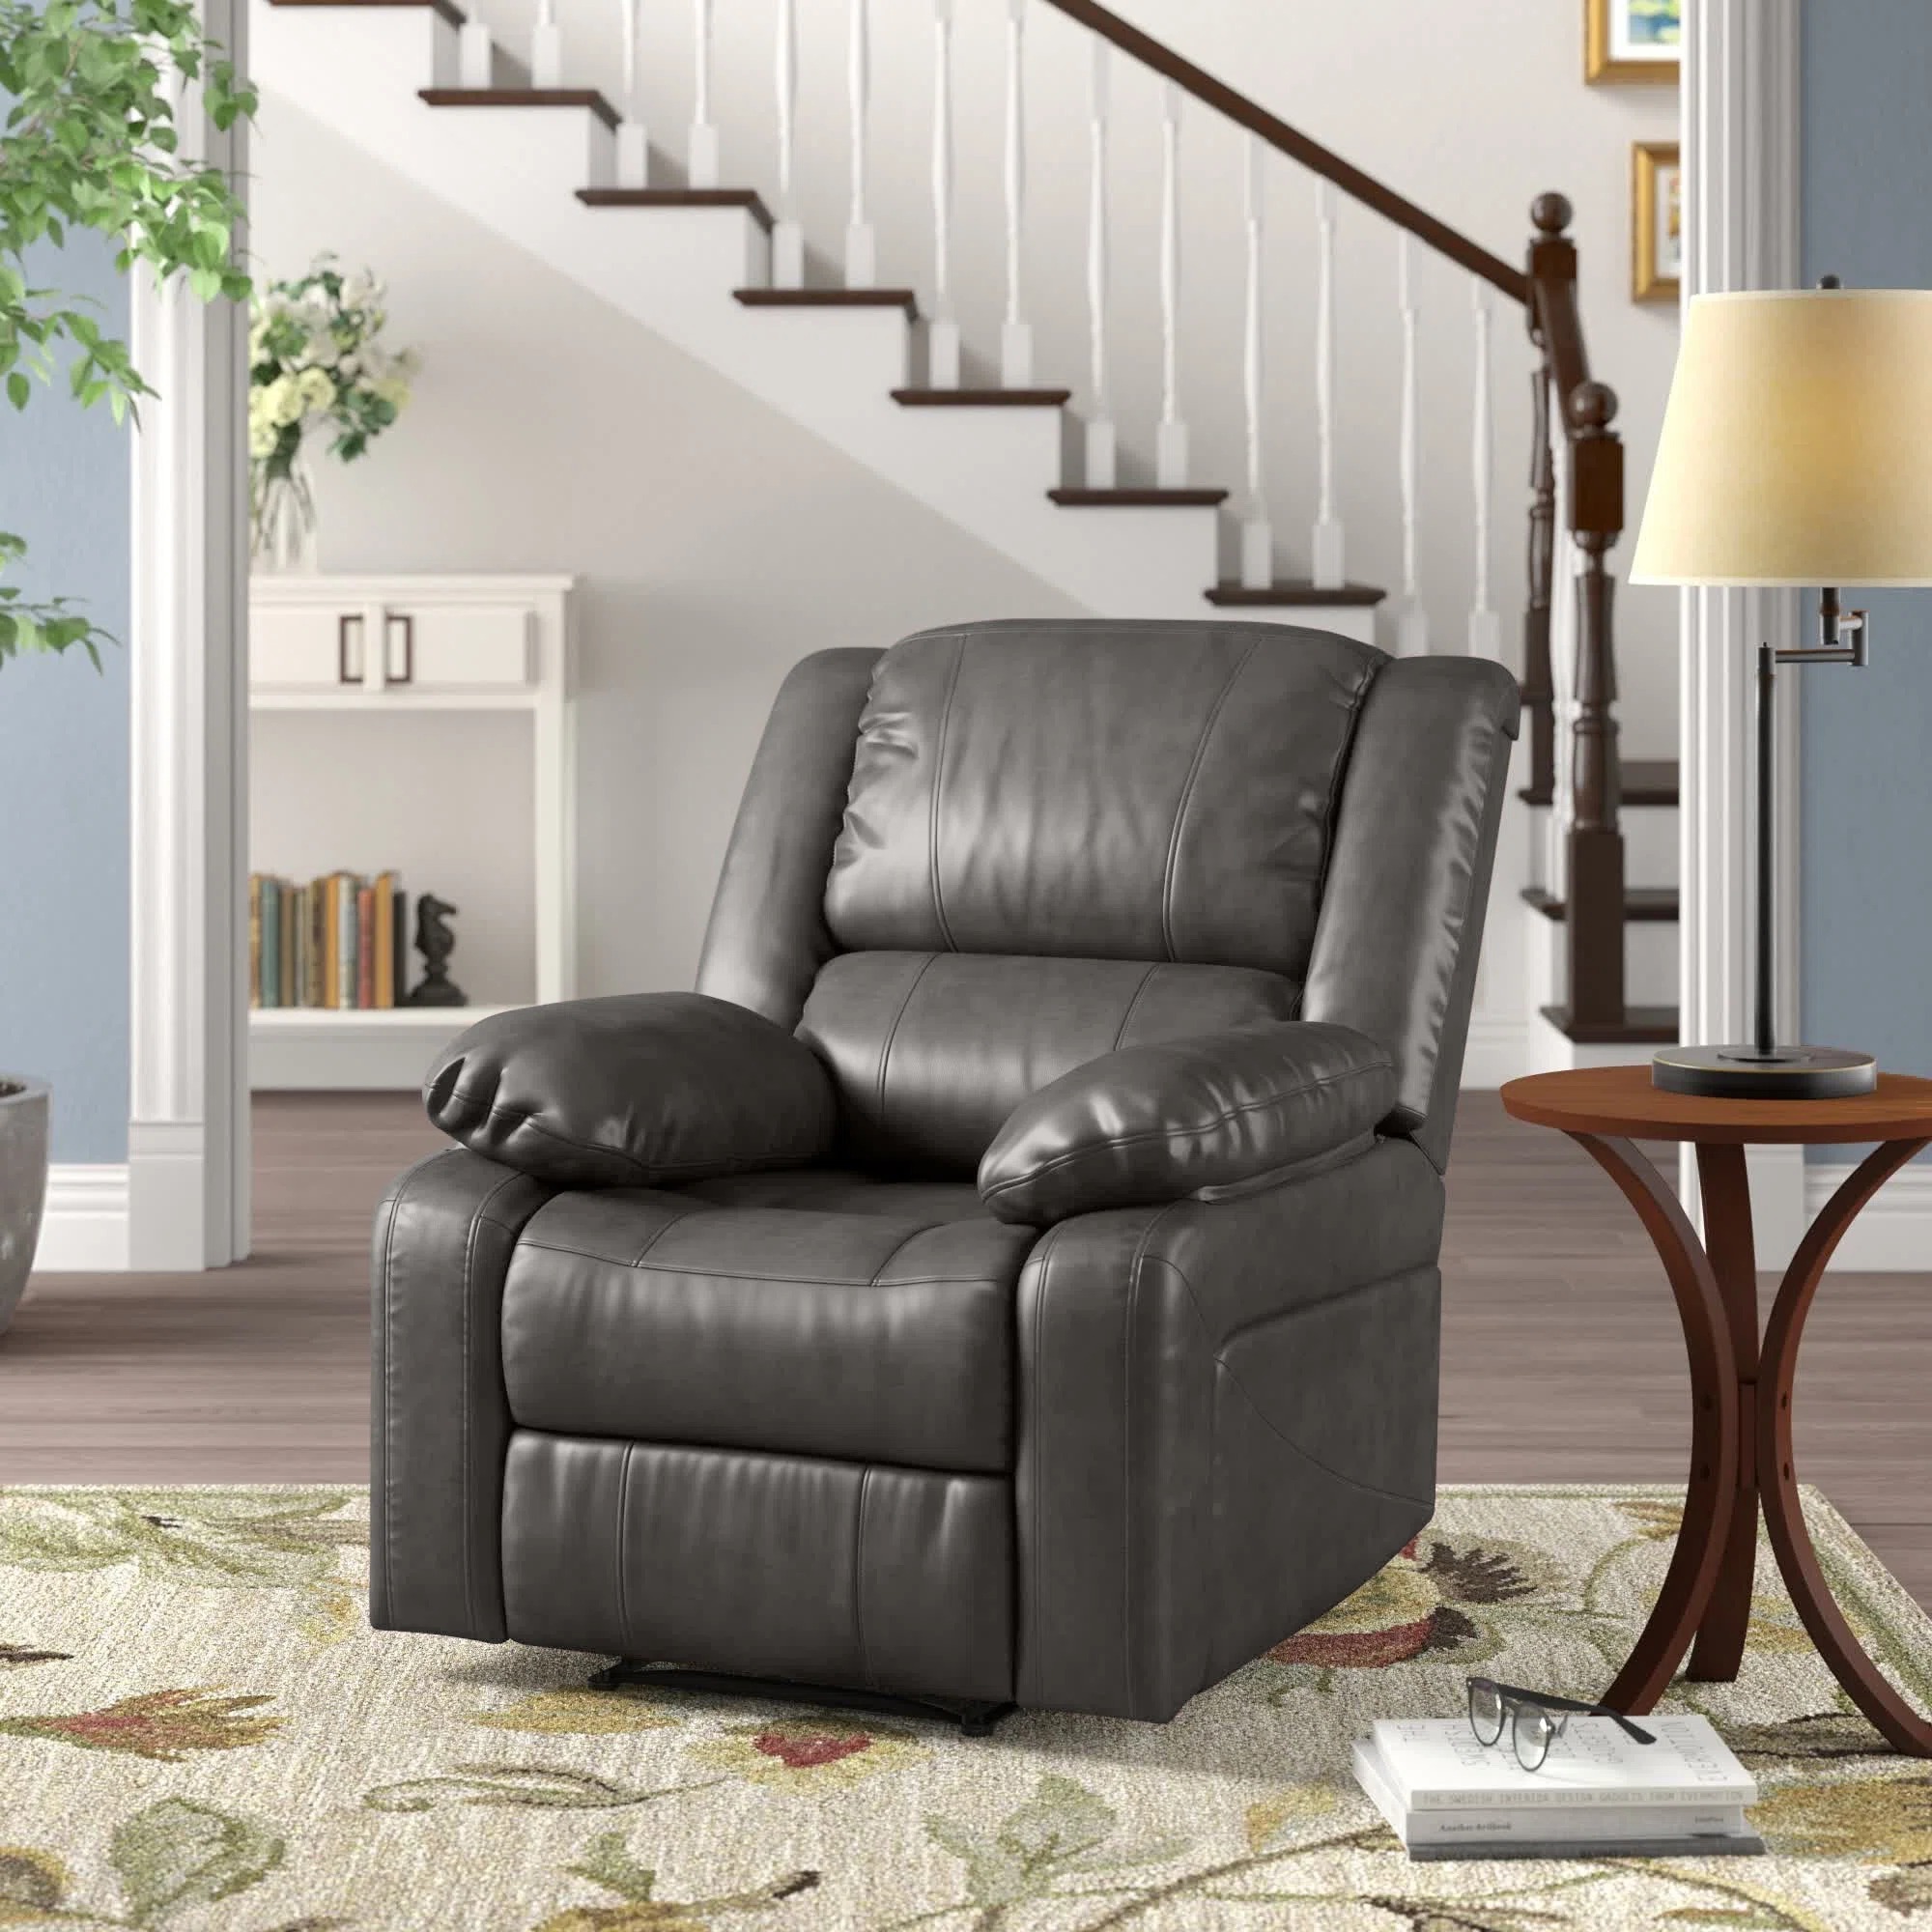 Comfortable Thomasville Leather Recliner 